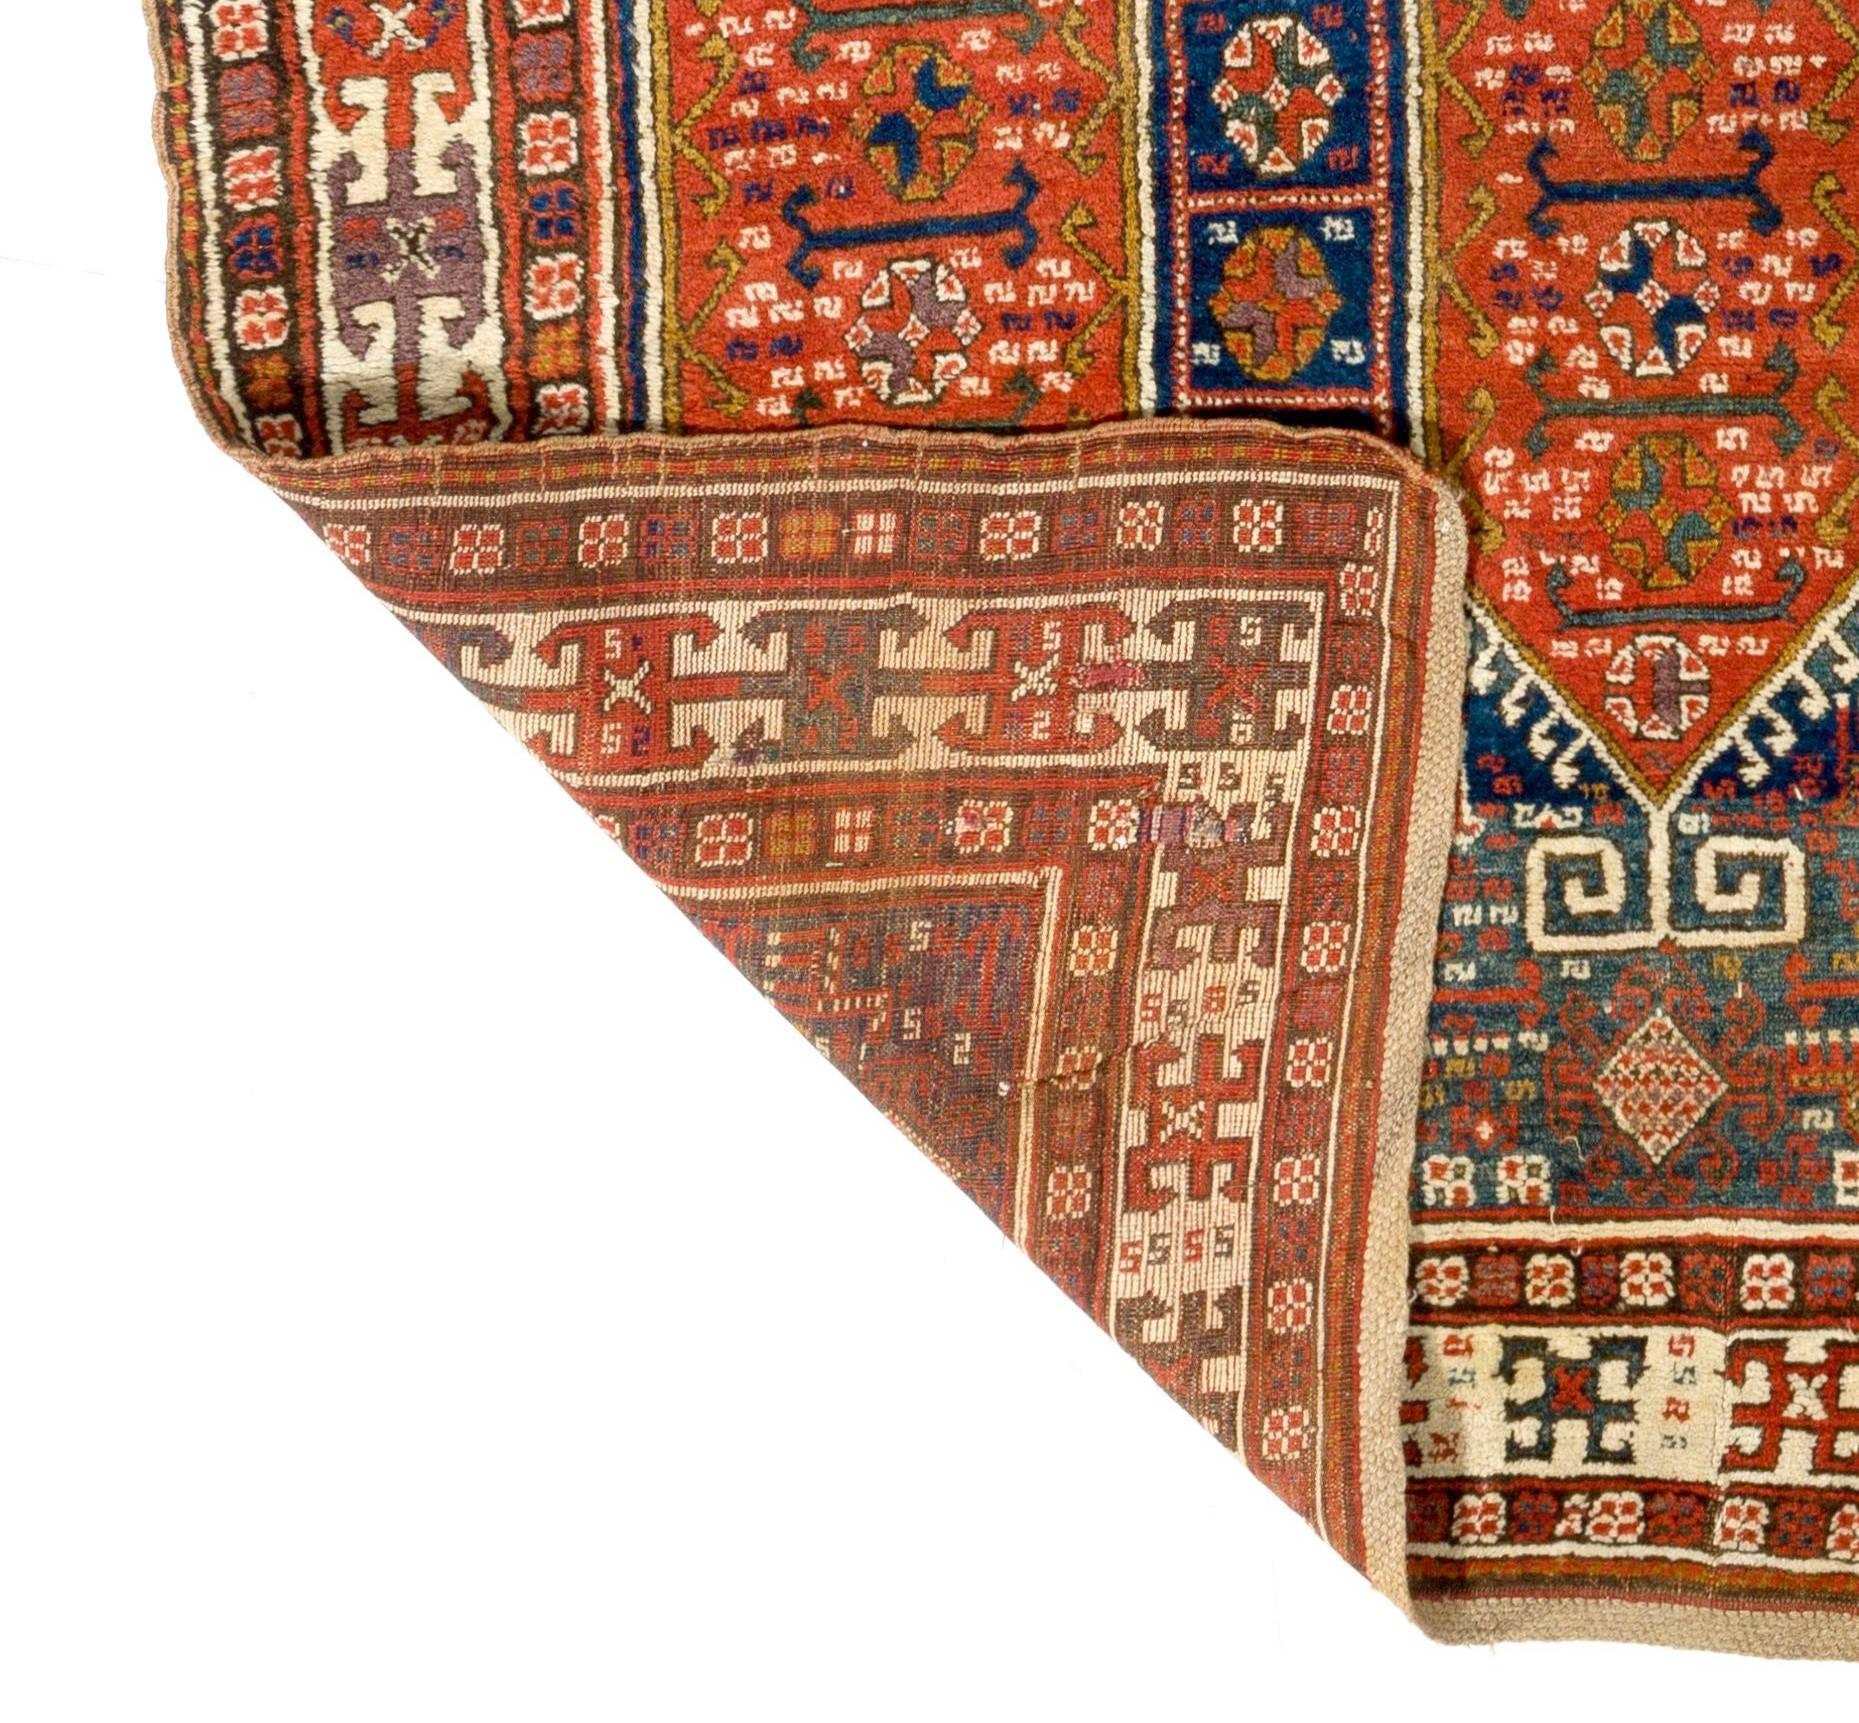 Immerse yourself in the rich tapestry of history with this extraordinary antique Caucasian Karabakh runner rug, dating back to circa 1880. Originating from the Caucasus region, this rug is a rare and cherished artifact that encapsulates centuries of